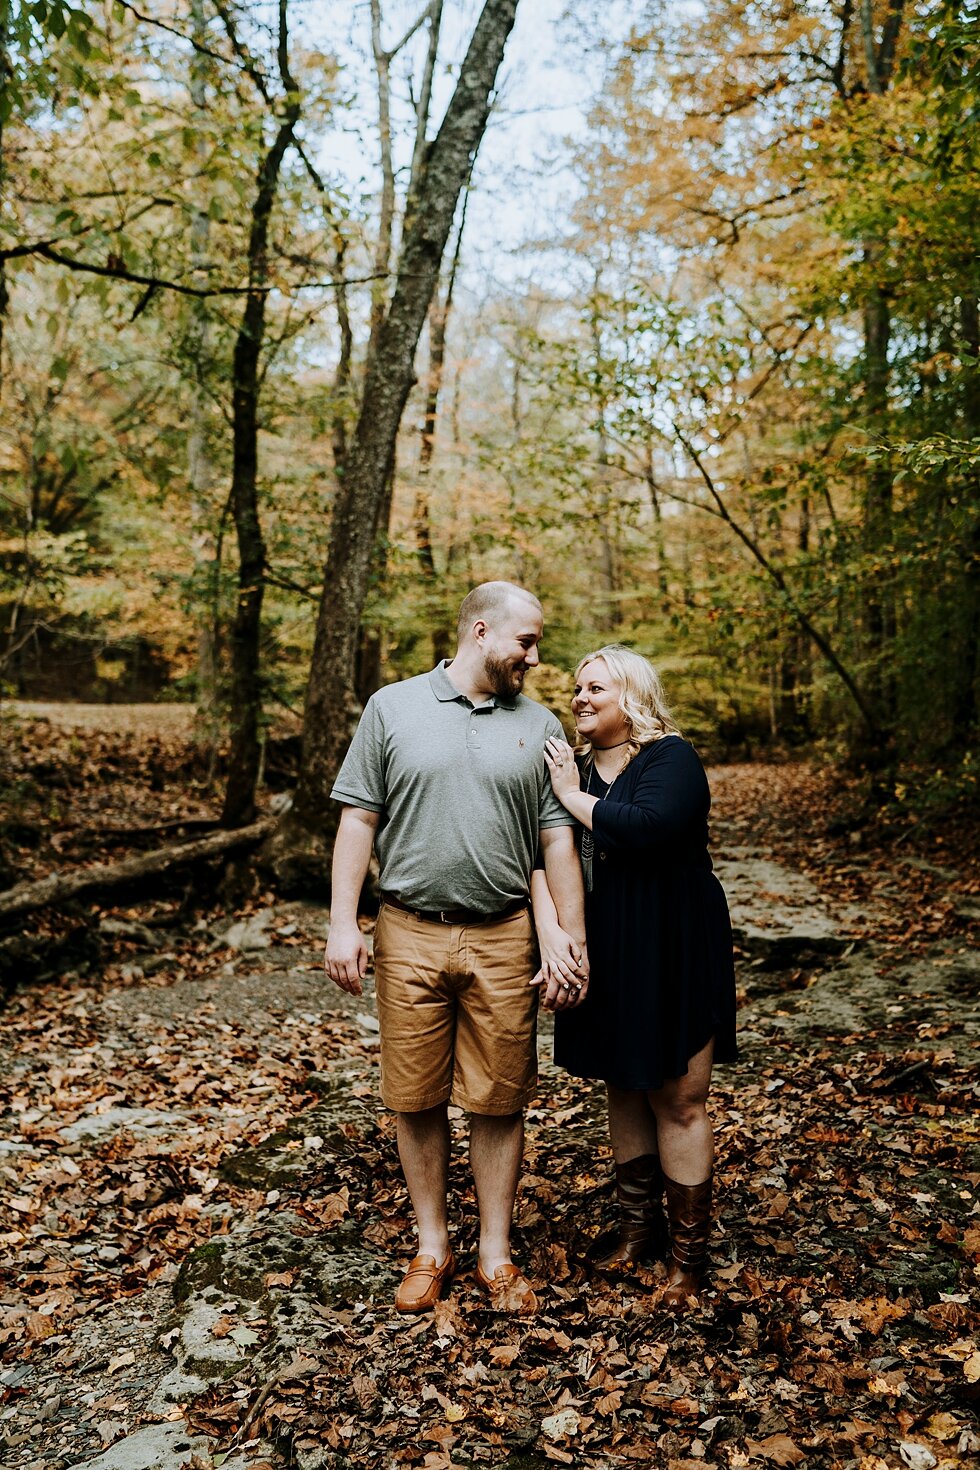  They soon will have each other to have and to hold for good #engagementgoals #engagementphotographer #engaged #outdoorengagement #kentuckyphotographer #indianaphotographer #louisvillephotographer #engagementphotos #savethedatephotos #savethedates #e